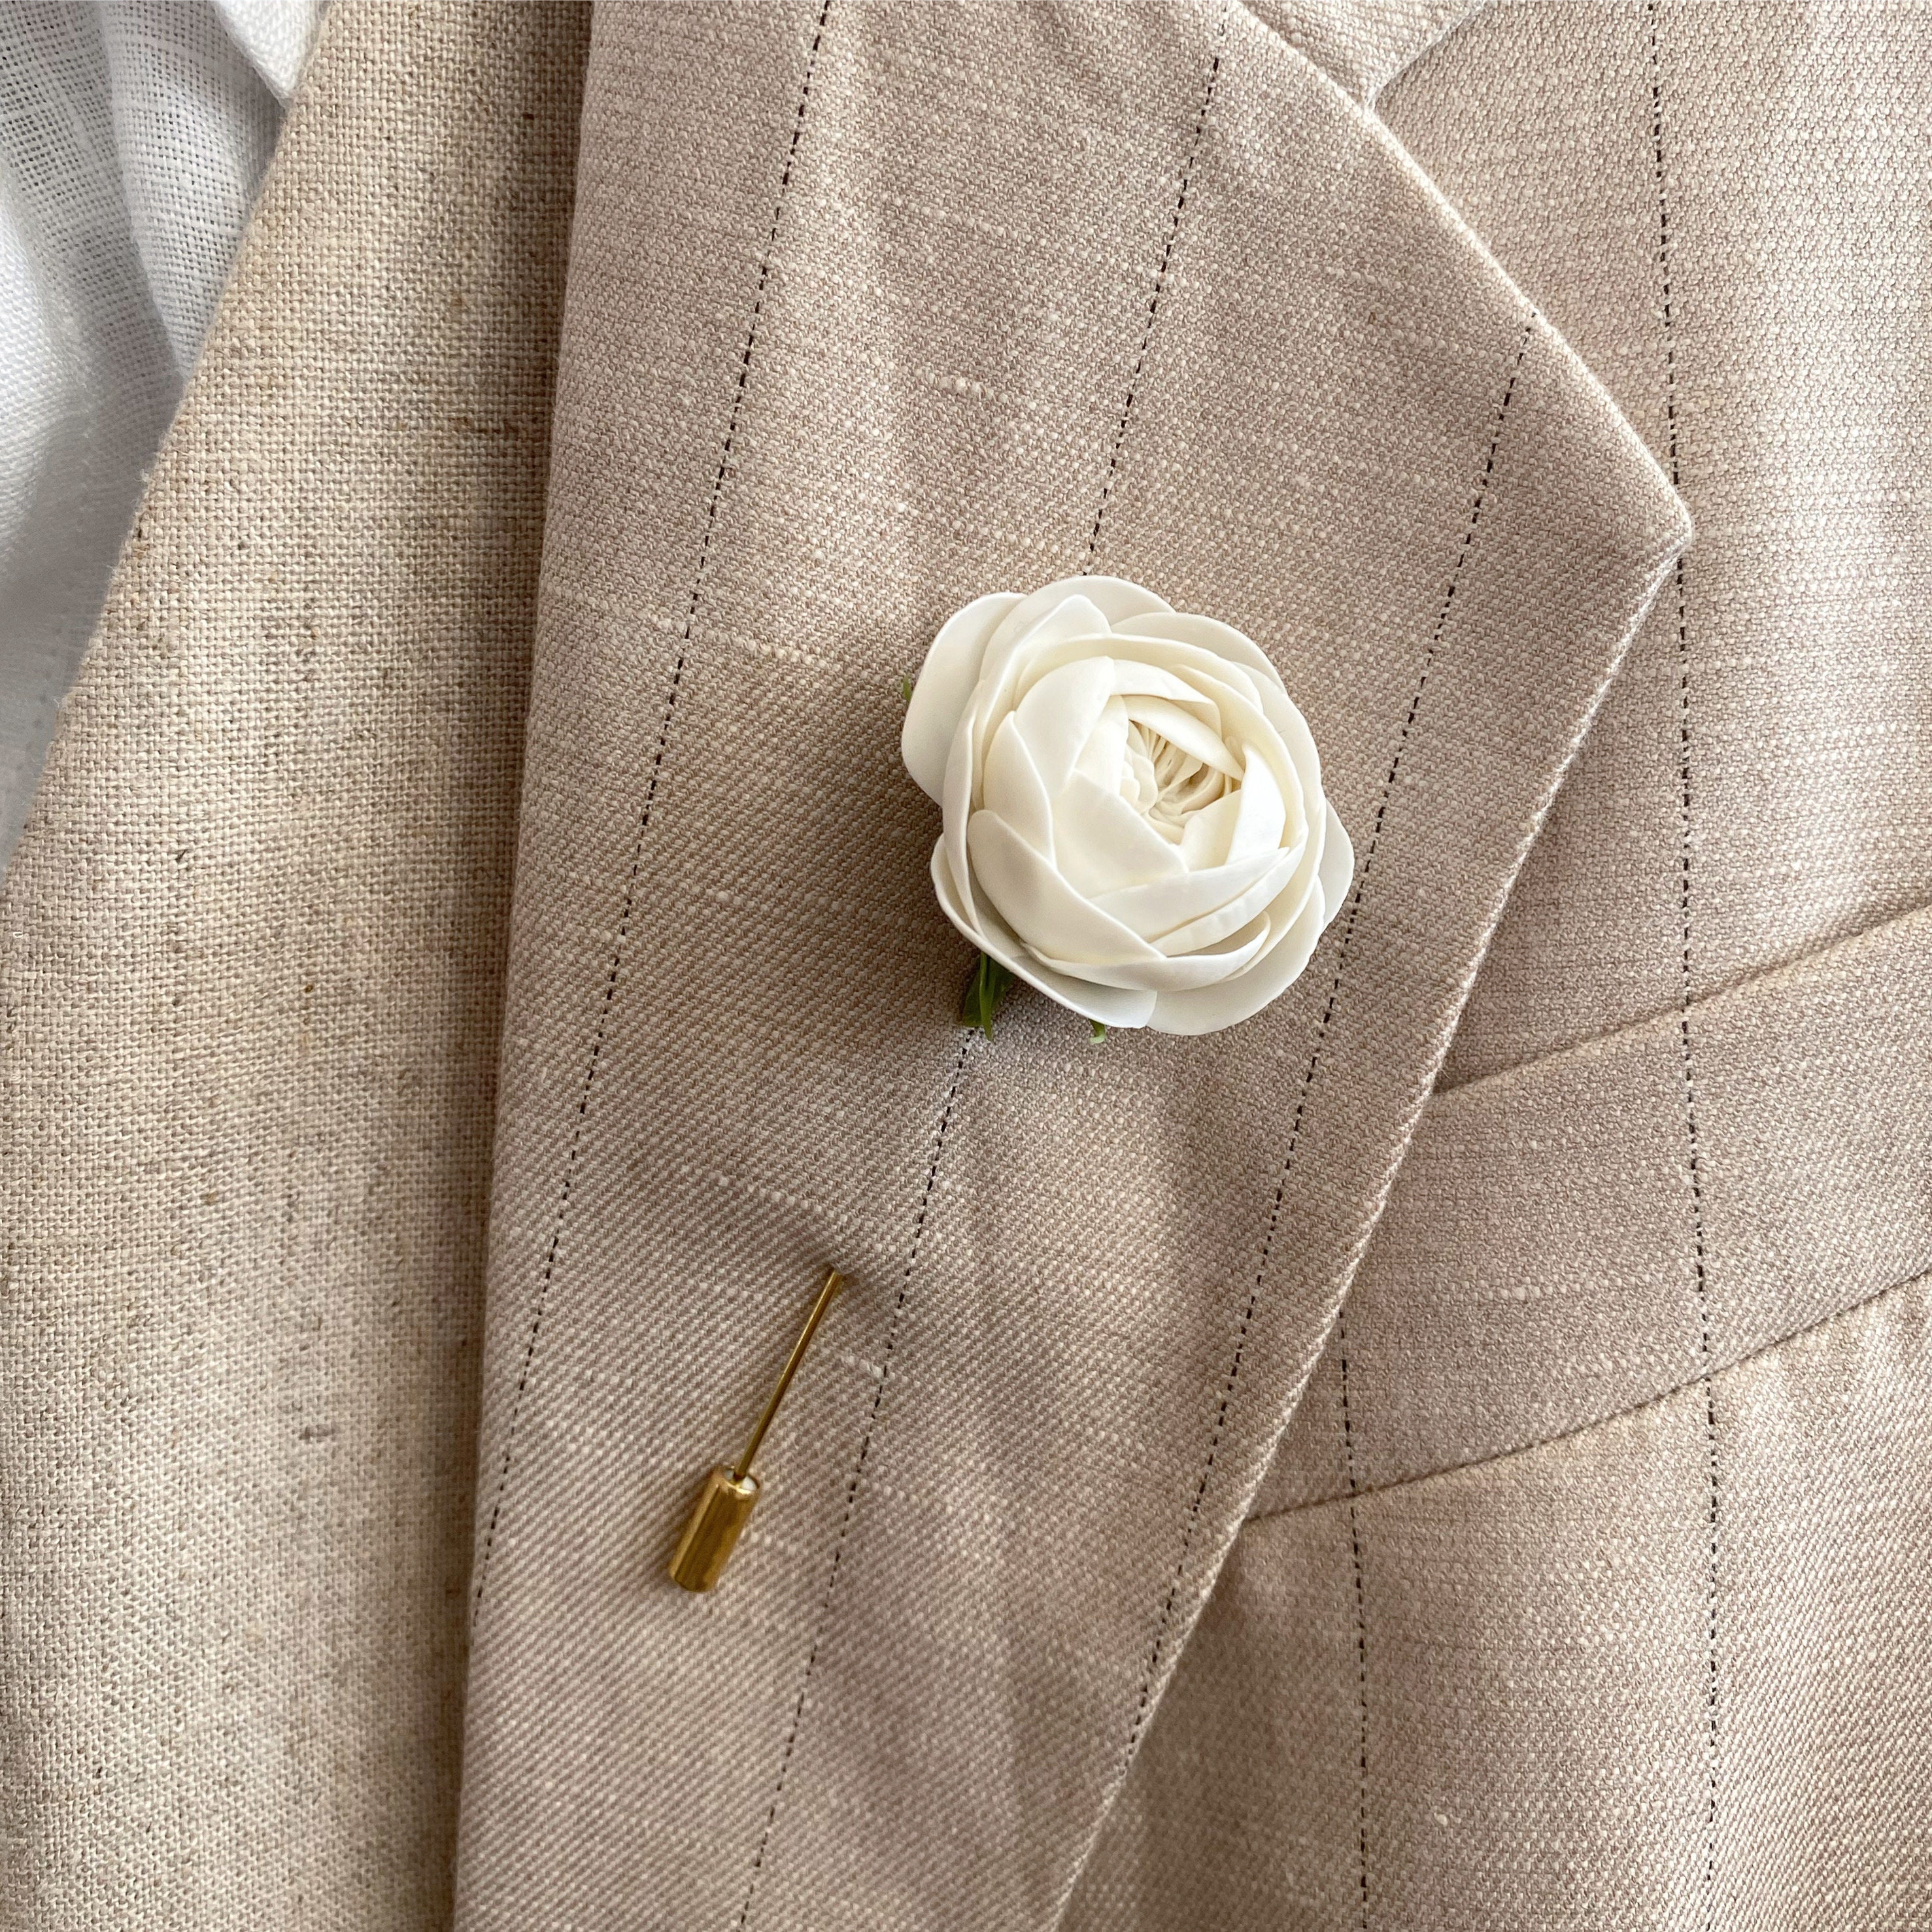 Ivory Flower Lapel Pin Wedding Lapel Pin Flower Boutonniere Floral